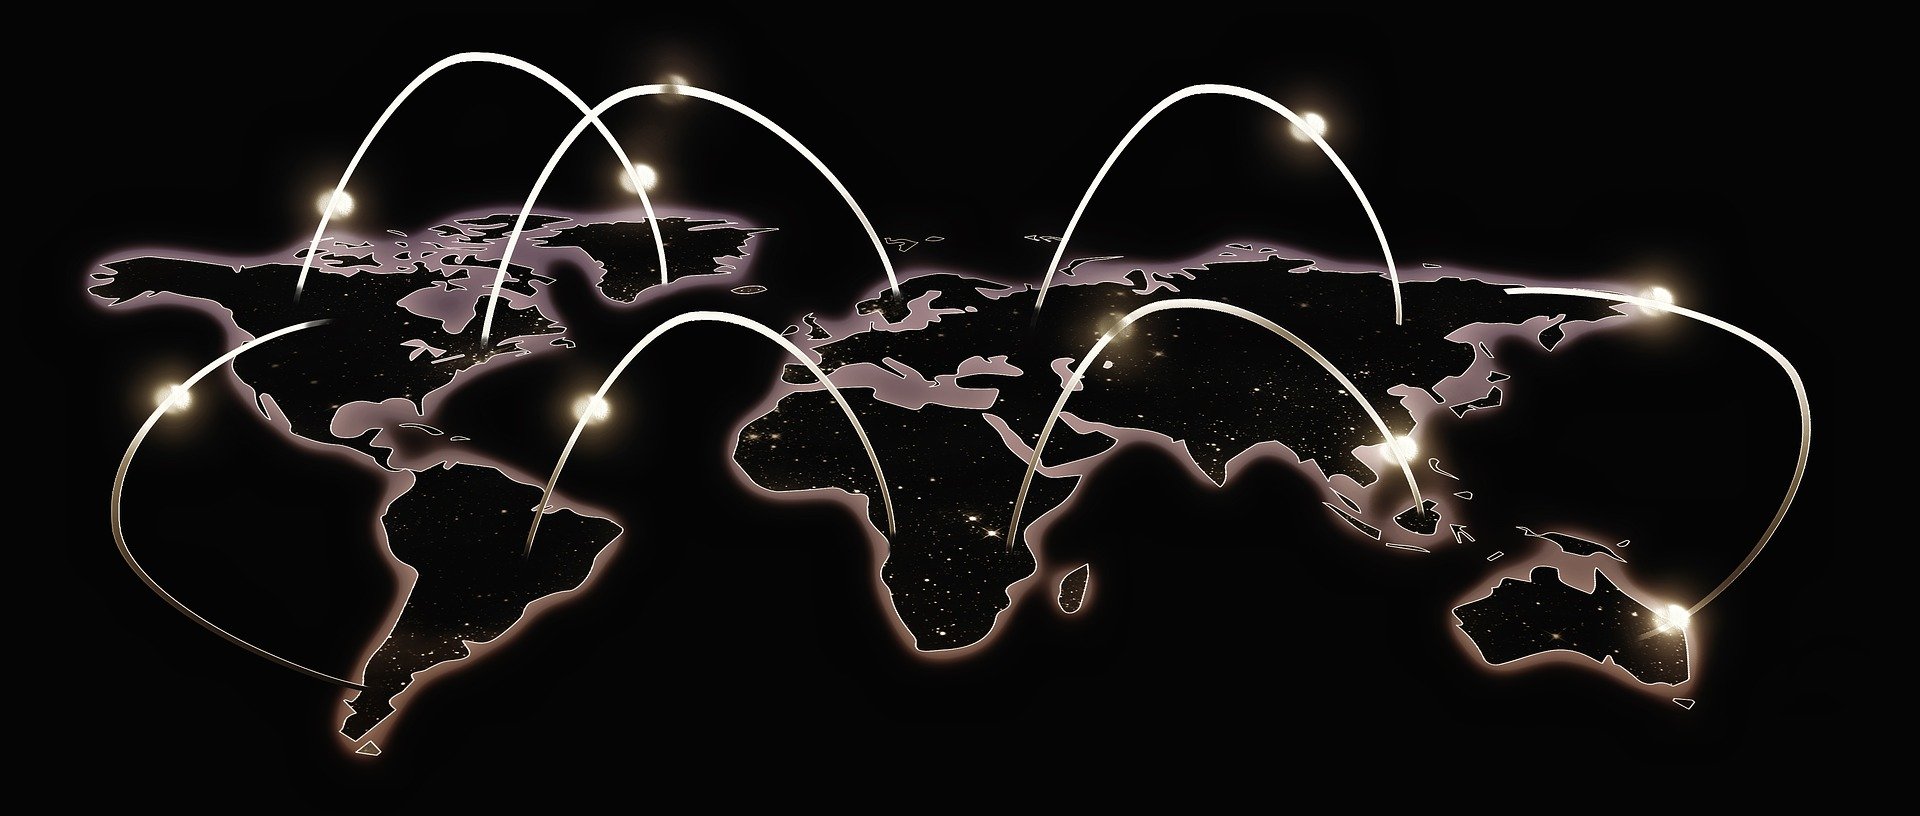 A monochrome image depicting global connections